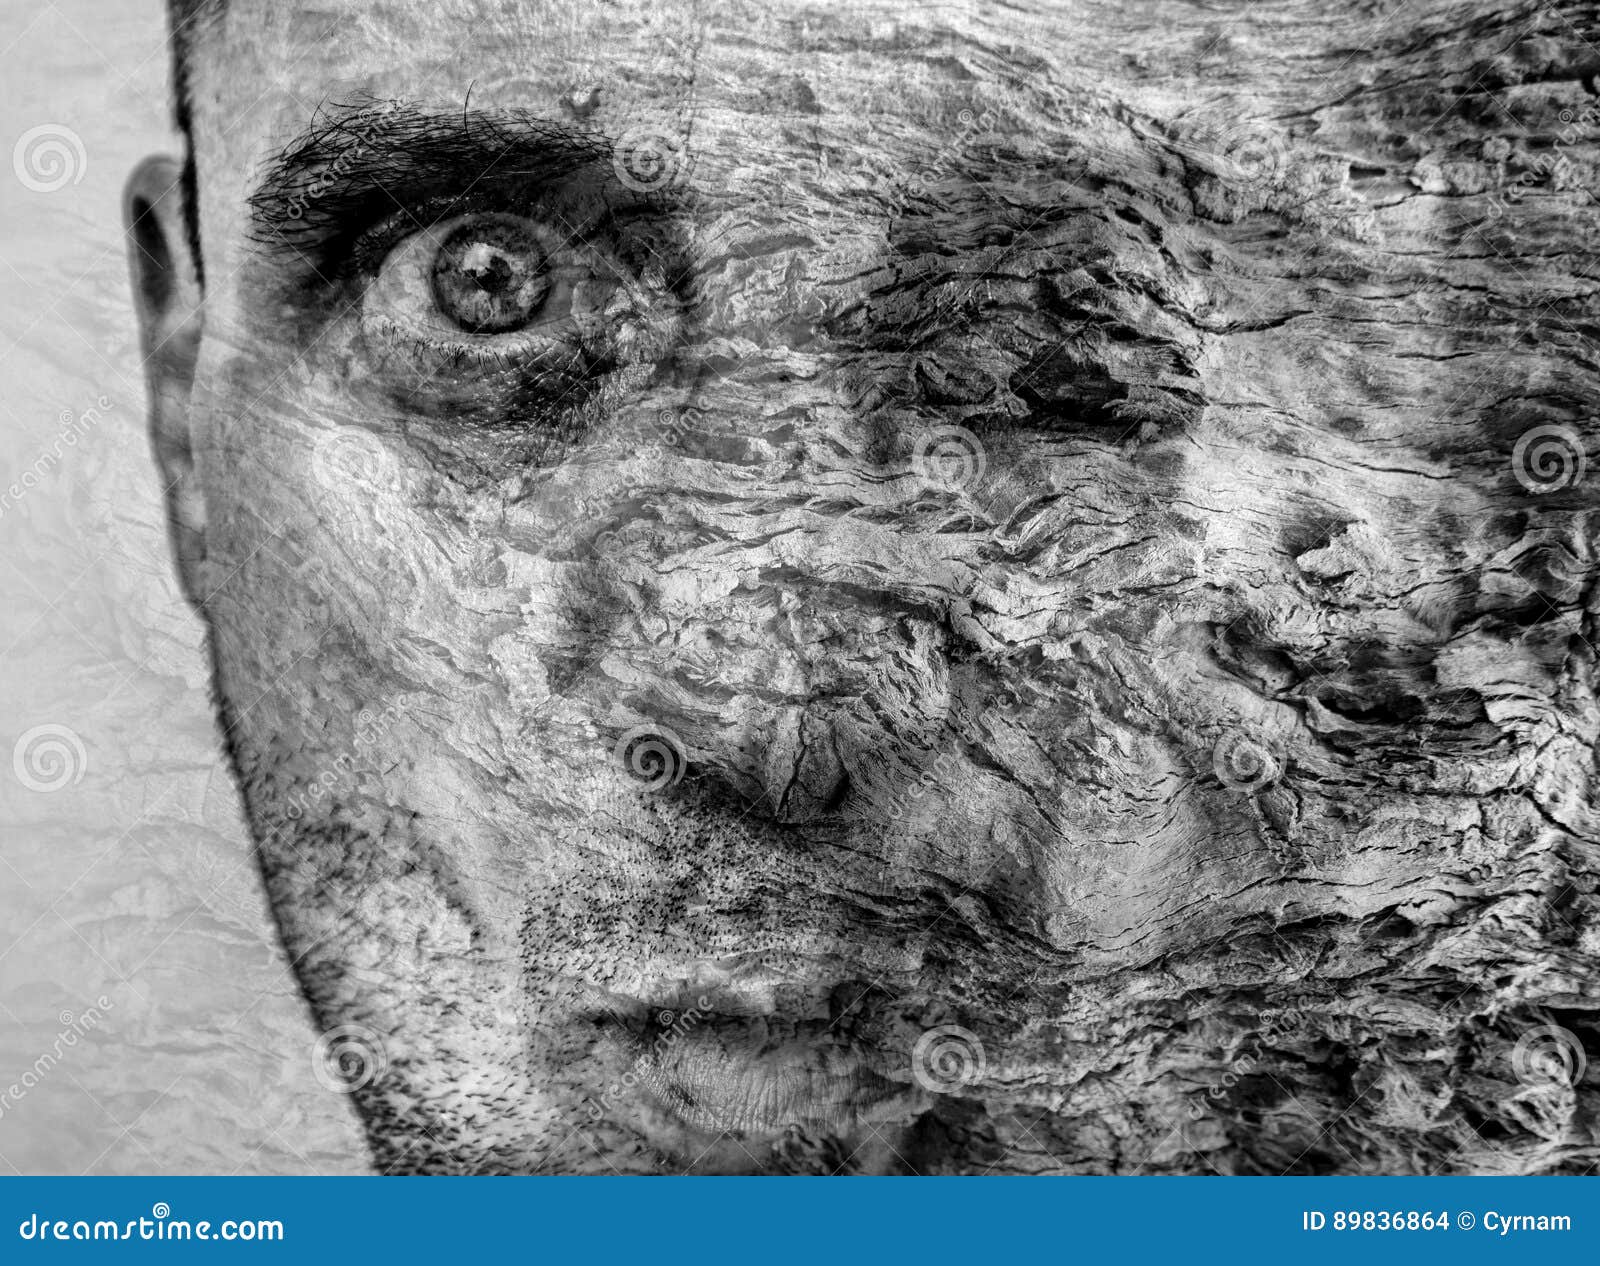 amazing metamorphosis of man becoming tree, graphic art, beautiful and unique tree bark texture on human face